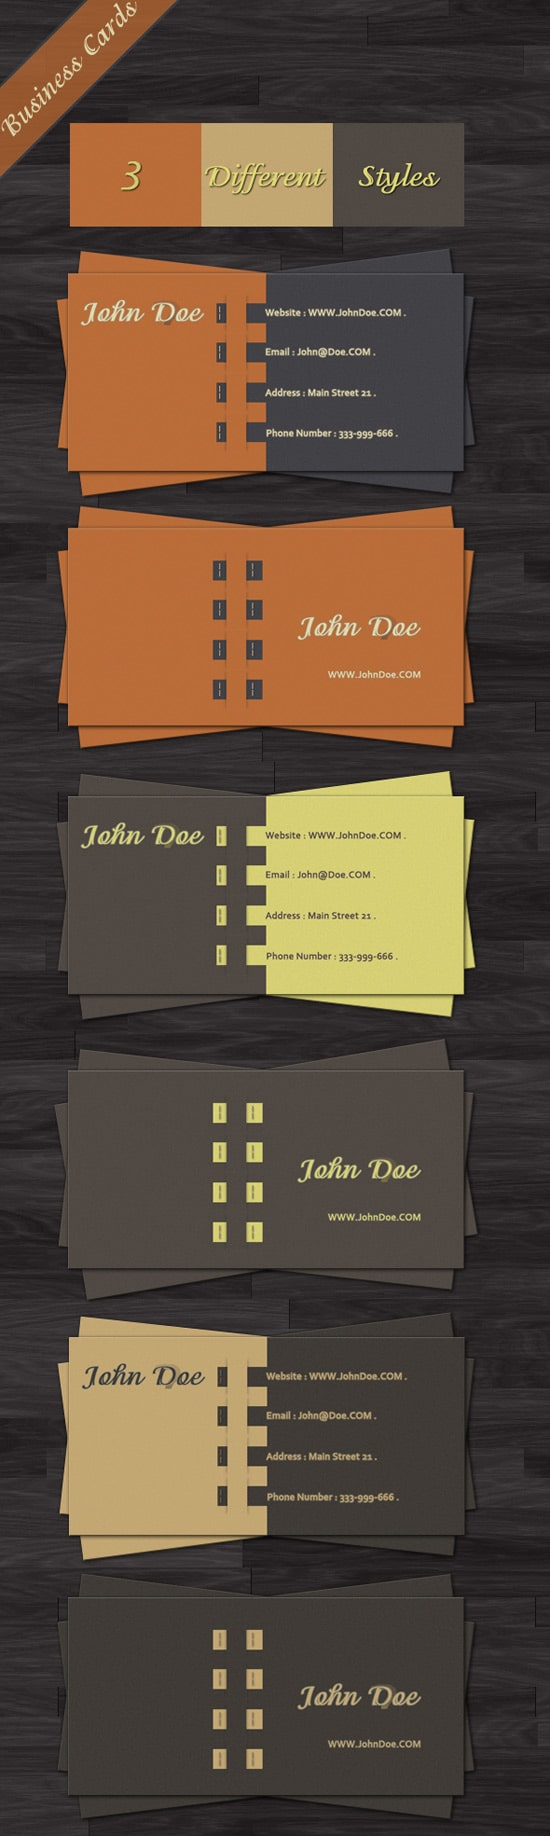 100 Free Business Card Templates – Designrfix With Visiting Card Templates For Photoshop